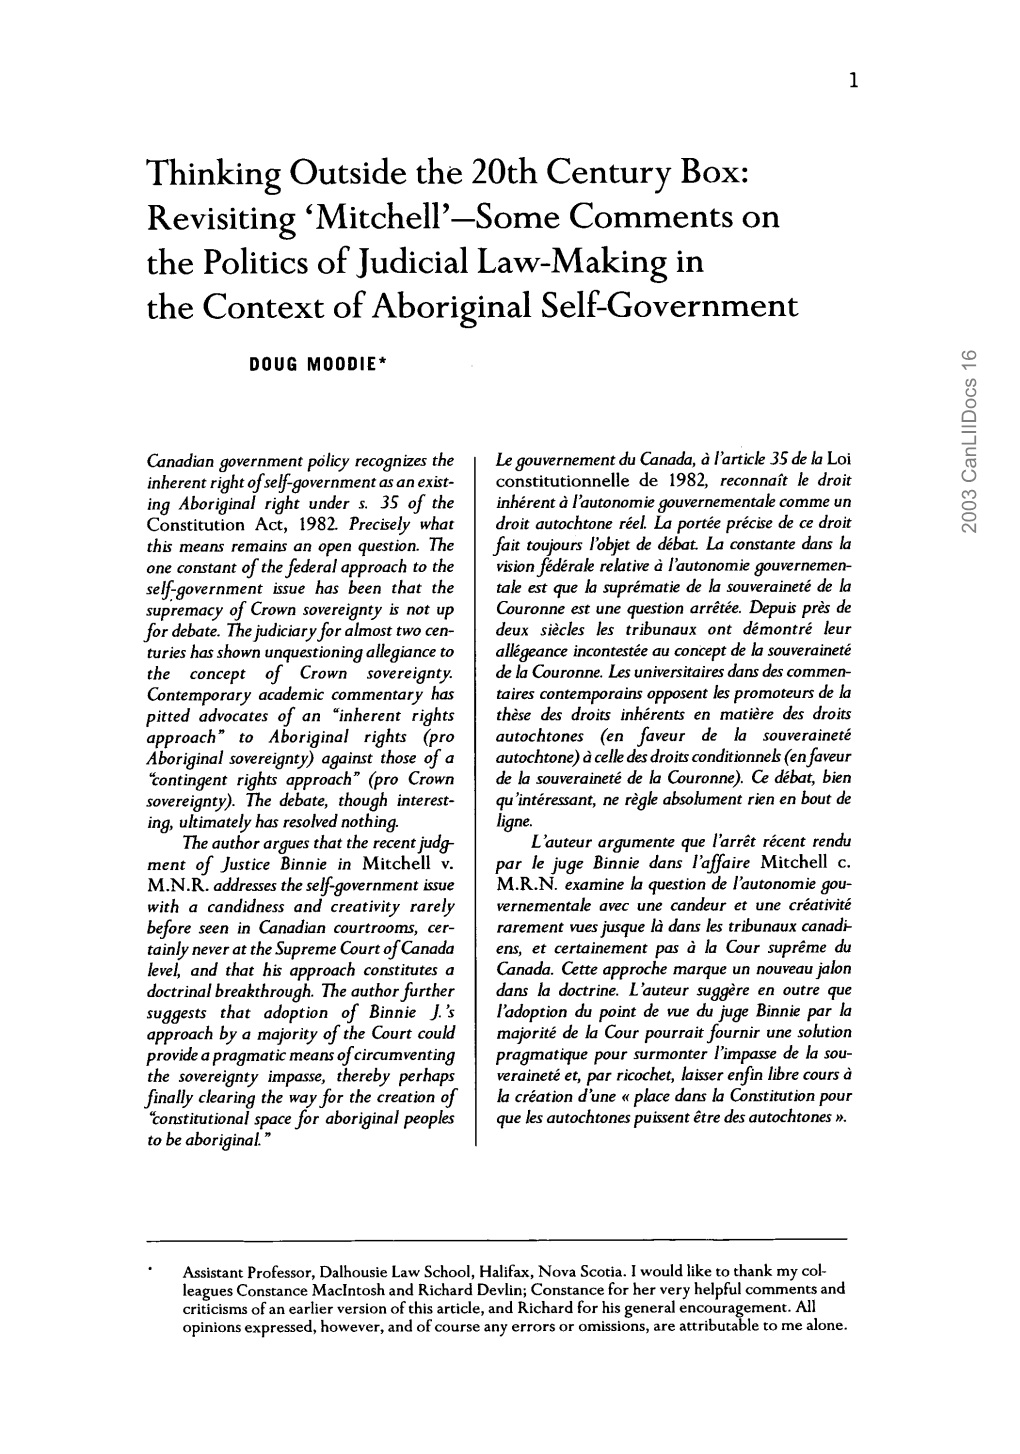 Some Comments on the Politics of Judicial Law-Making in the Context of Aboriginal Self-Government